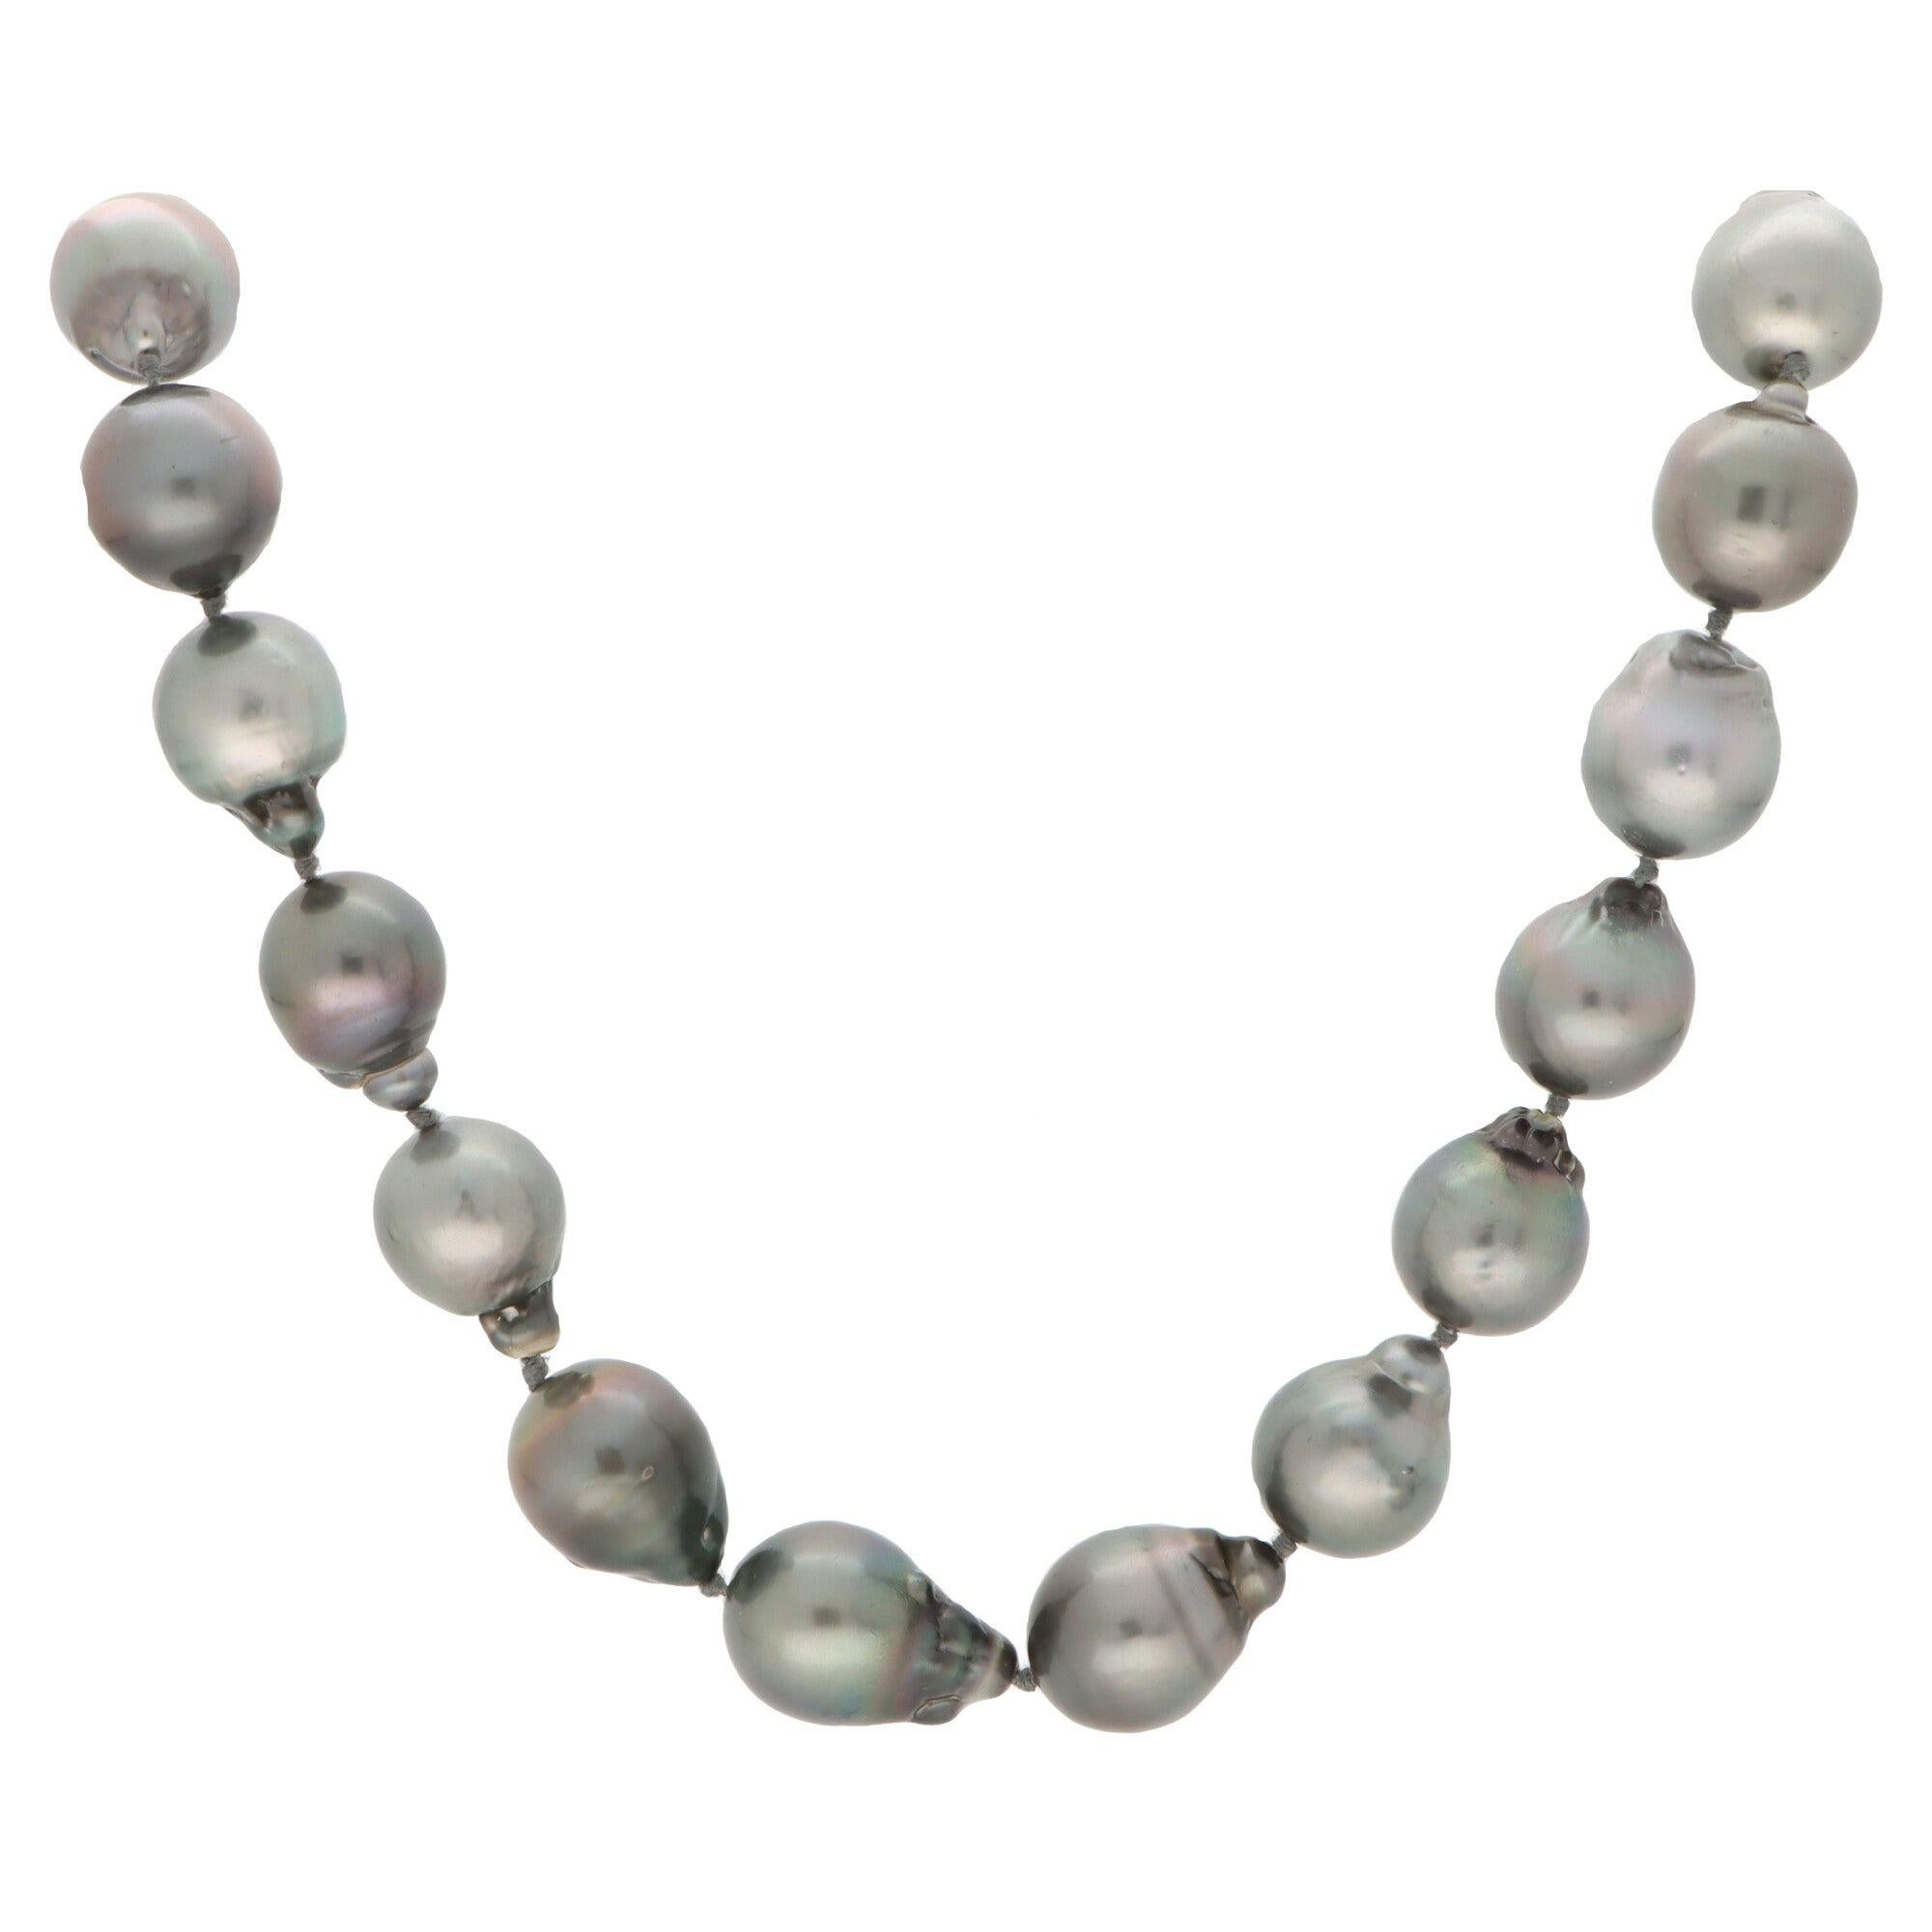 Tahitian Pearl Strand Necklace with 18k White Gold Diamond Clasp